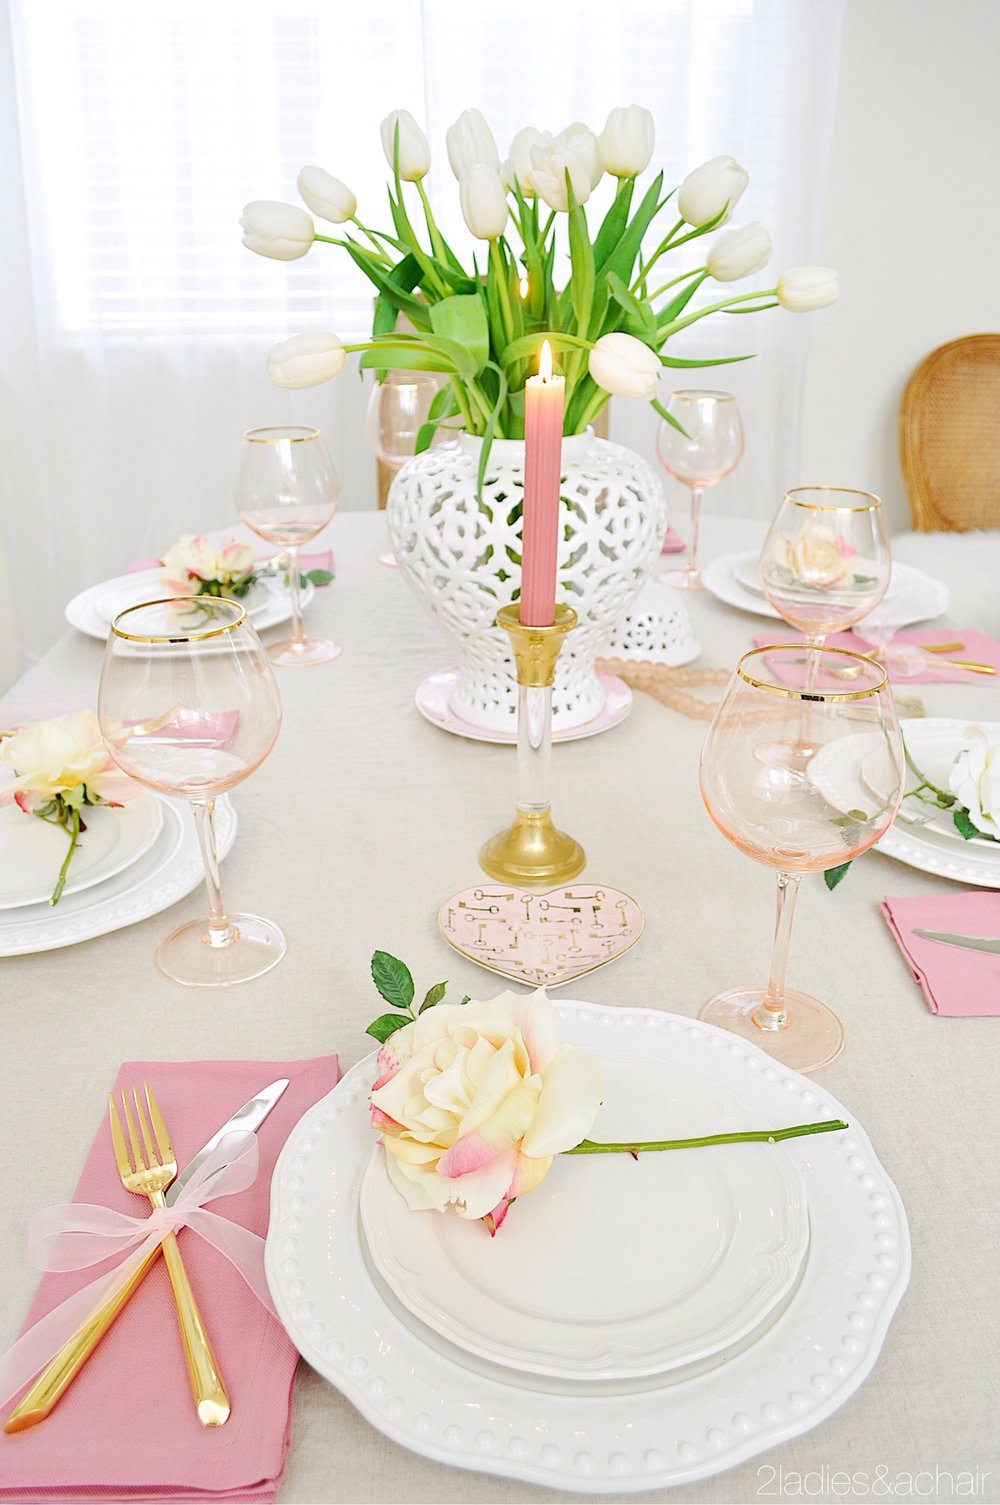 Tips for Creating a Romantic Valentine's Day Table — 2 Ladies & A